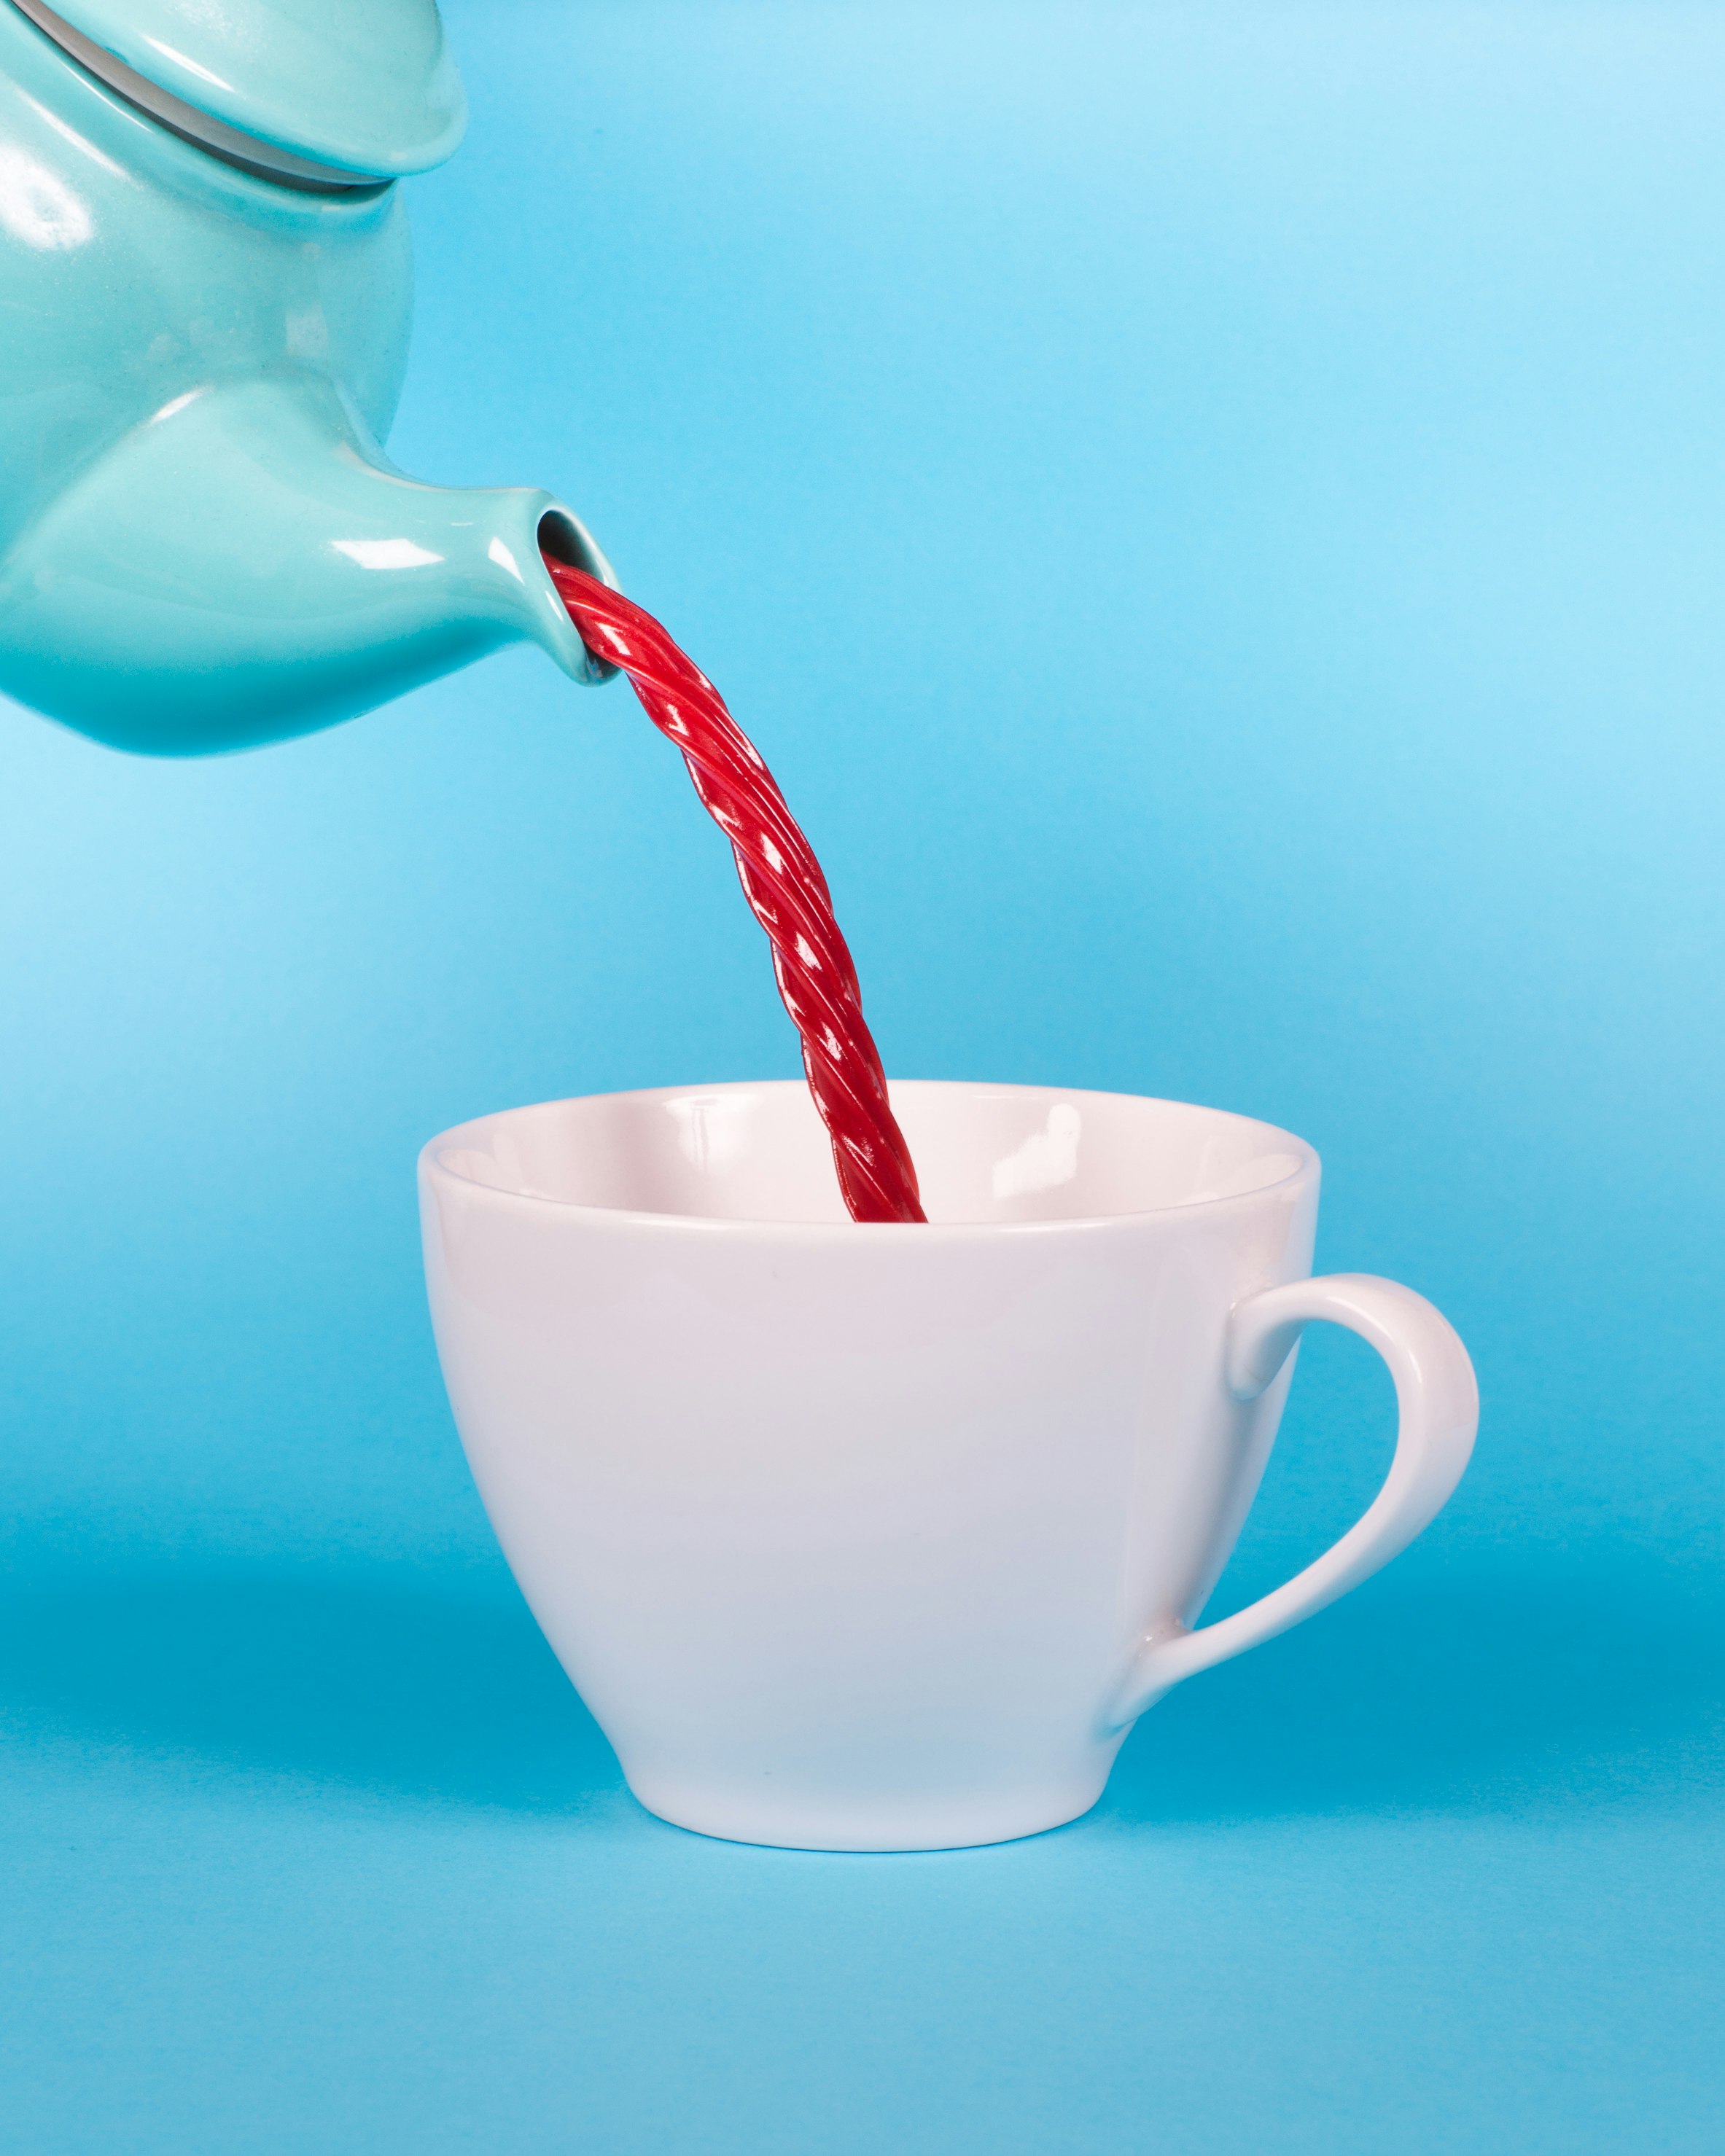 green teapot pouring red liquid to white teacup closeup photography